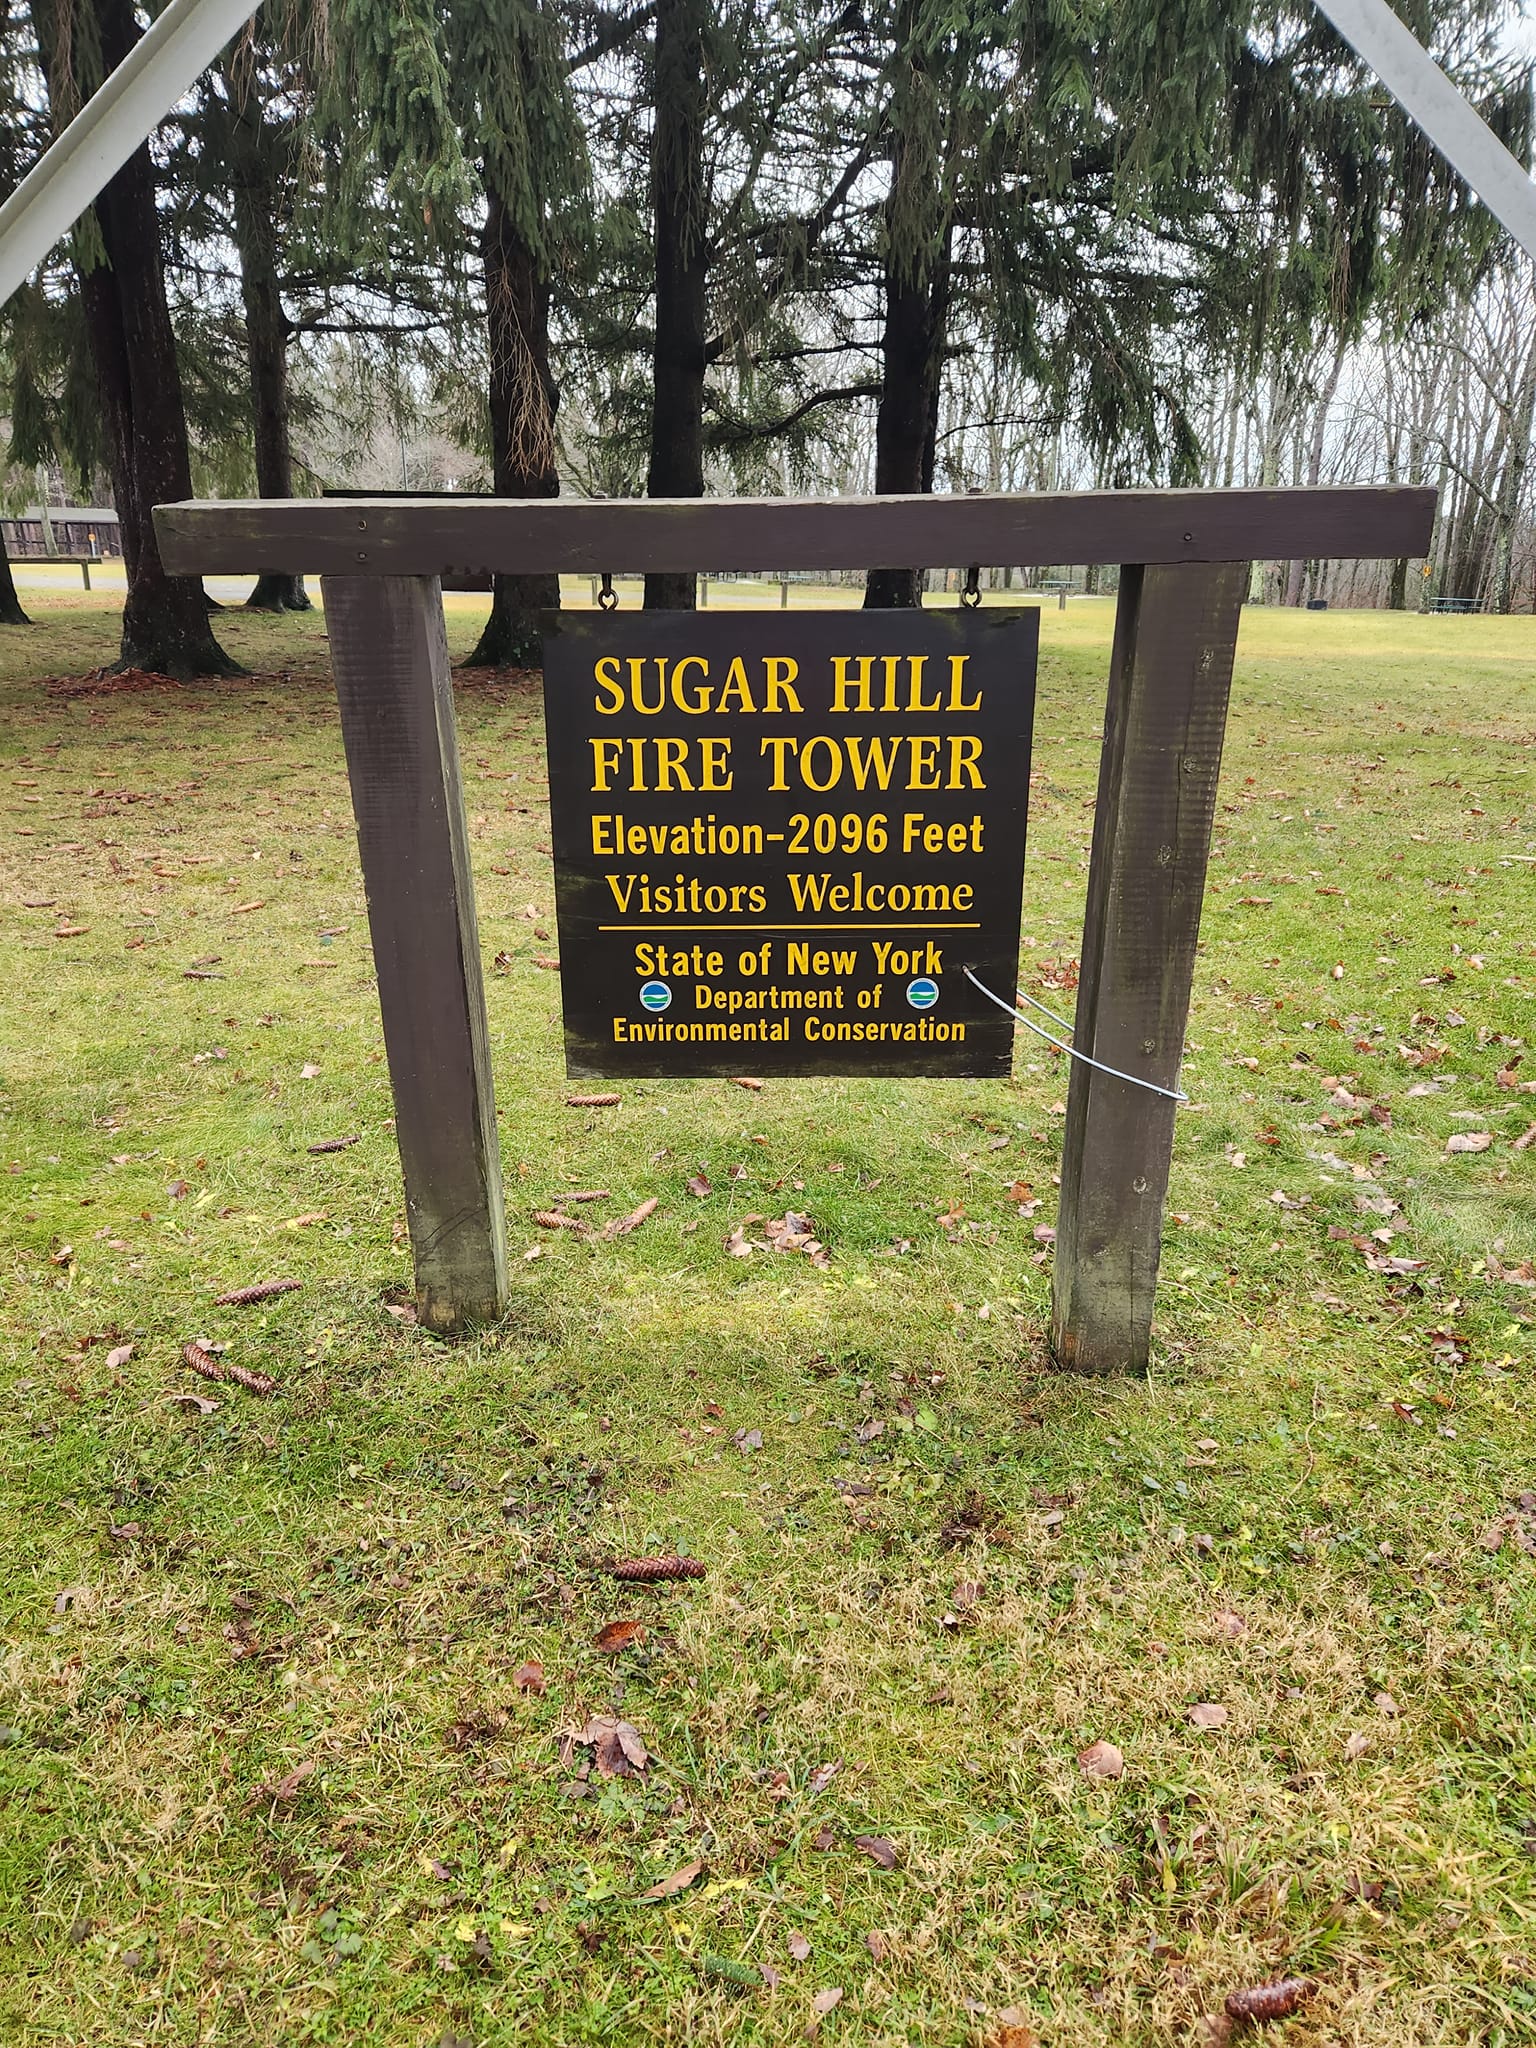 Sugar Hill State Forest Horse Campsite in New York | Top Horse Trails